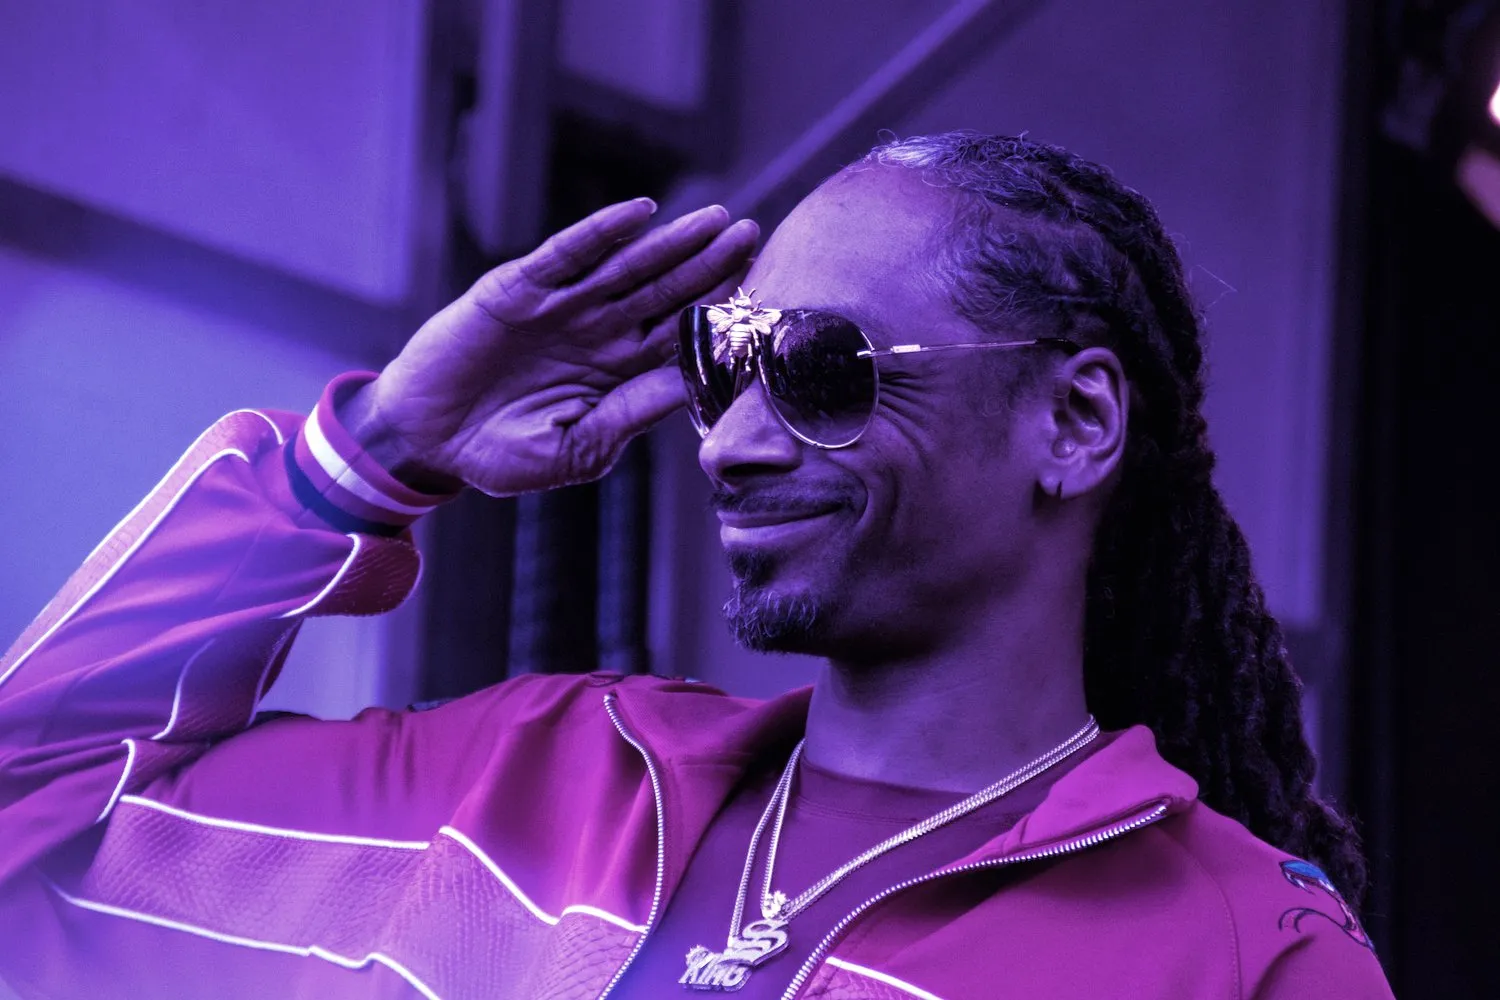 Snoop Dog: Rapper, NFT enthusiast and Ethereum whale? Image: Shutterstock